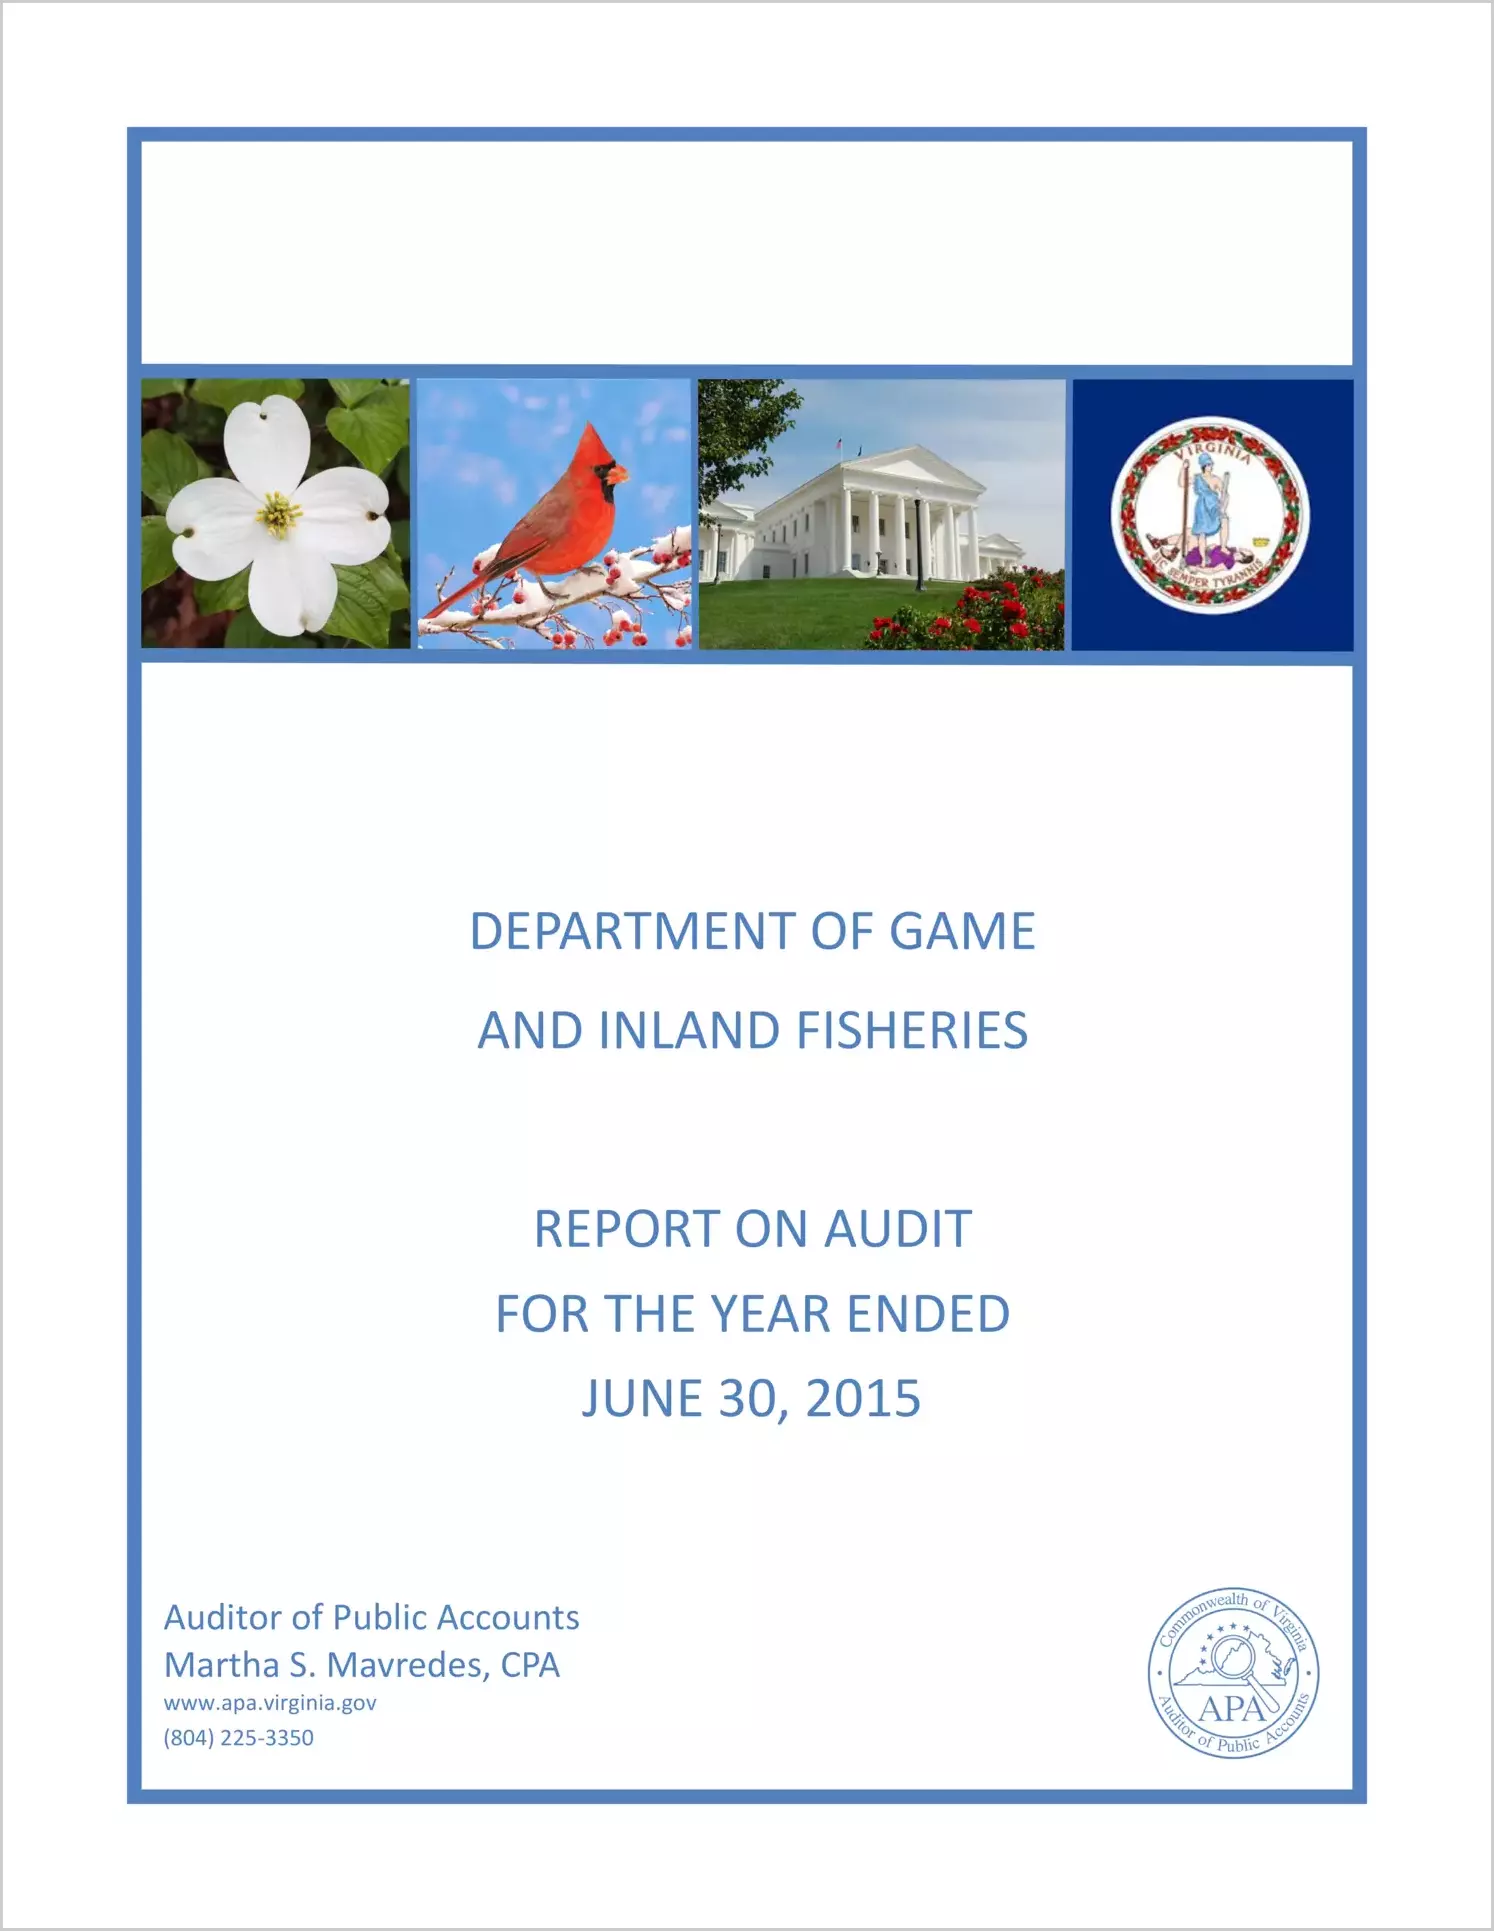 Department of Game and Inland Fisheries for the year ended June 30, 2015